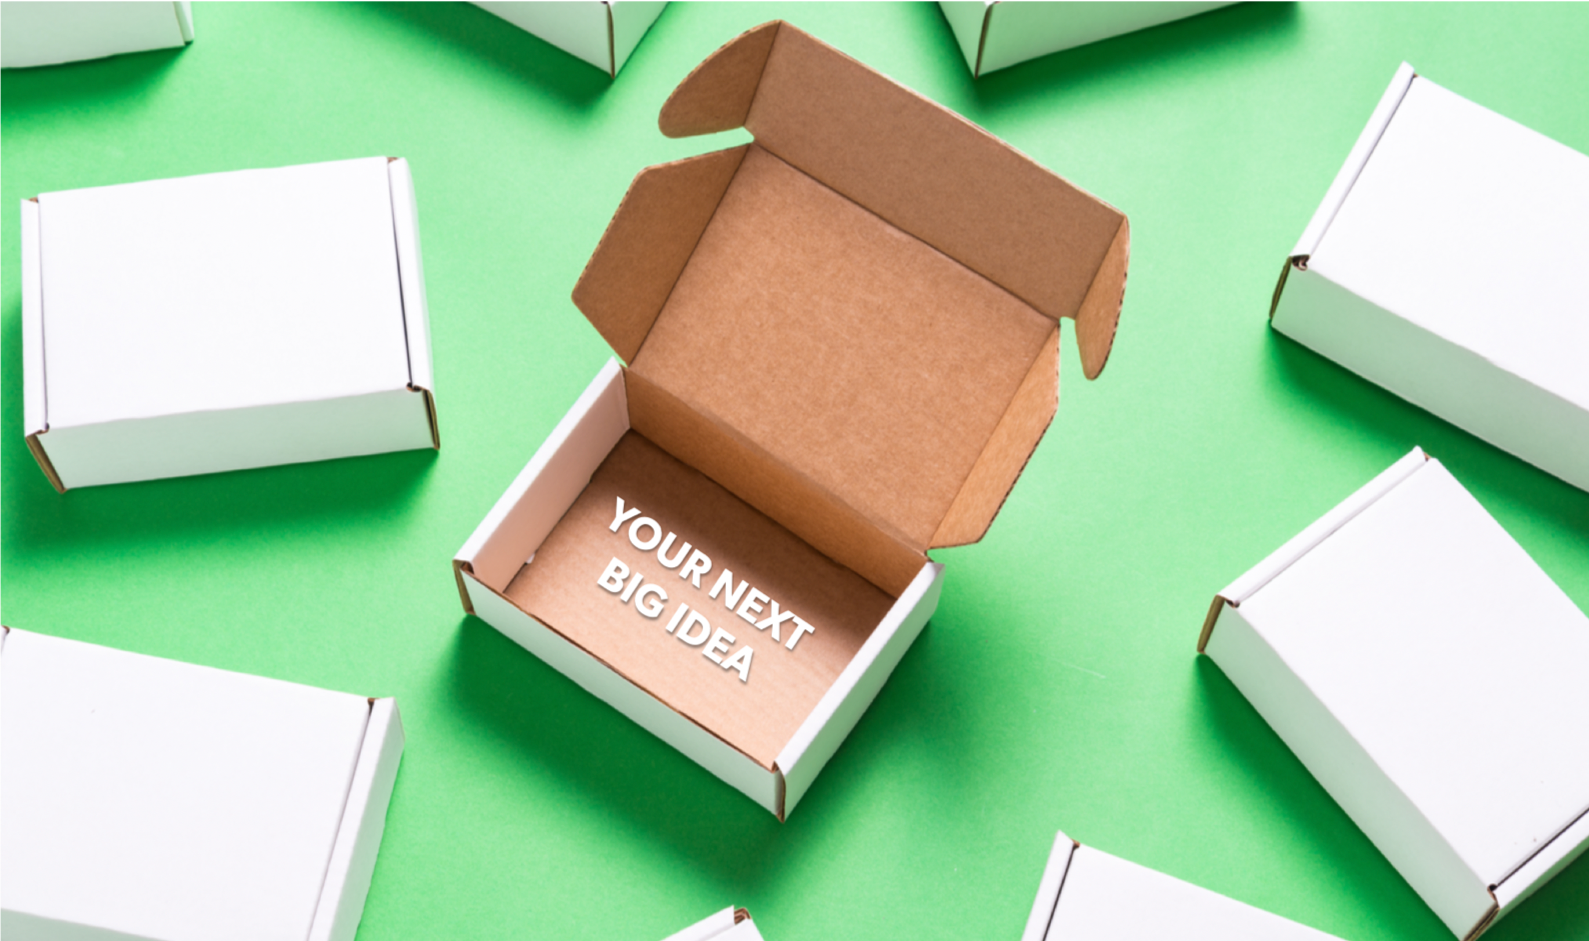 Mockup showing empty boxes with the words "Your next big idea" inside one of the boxes